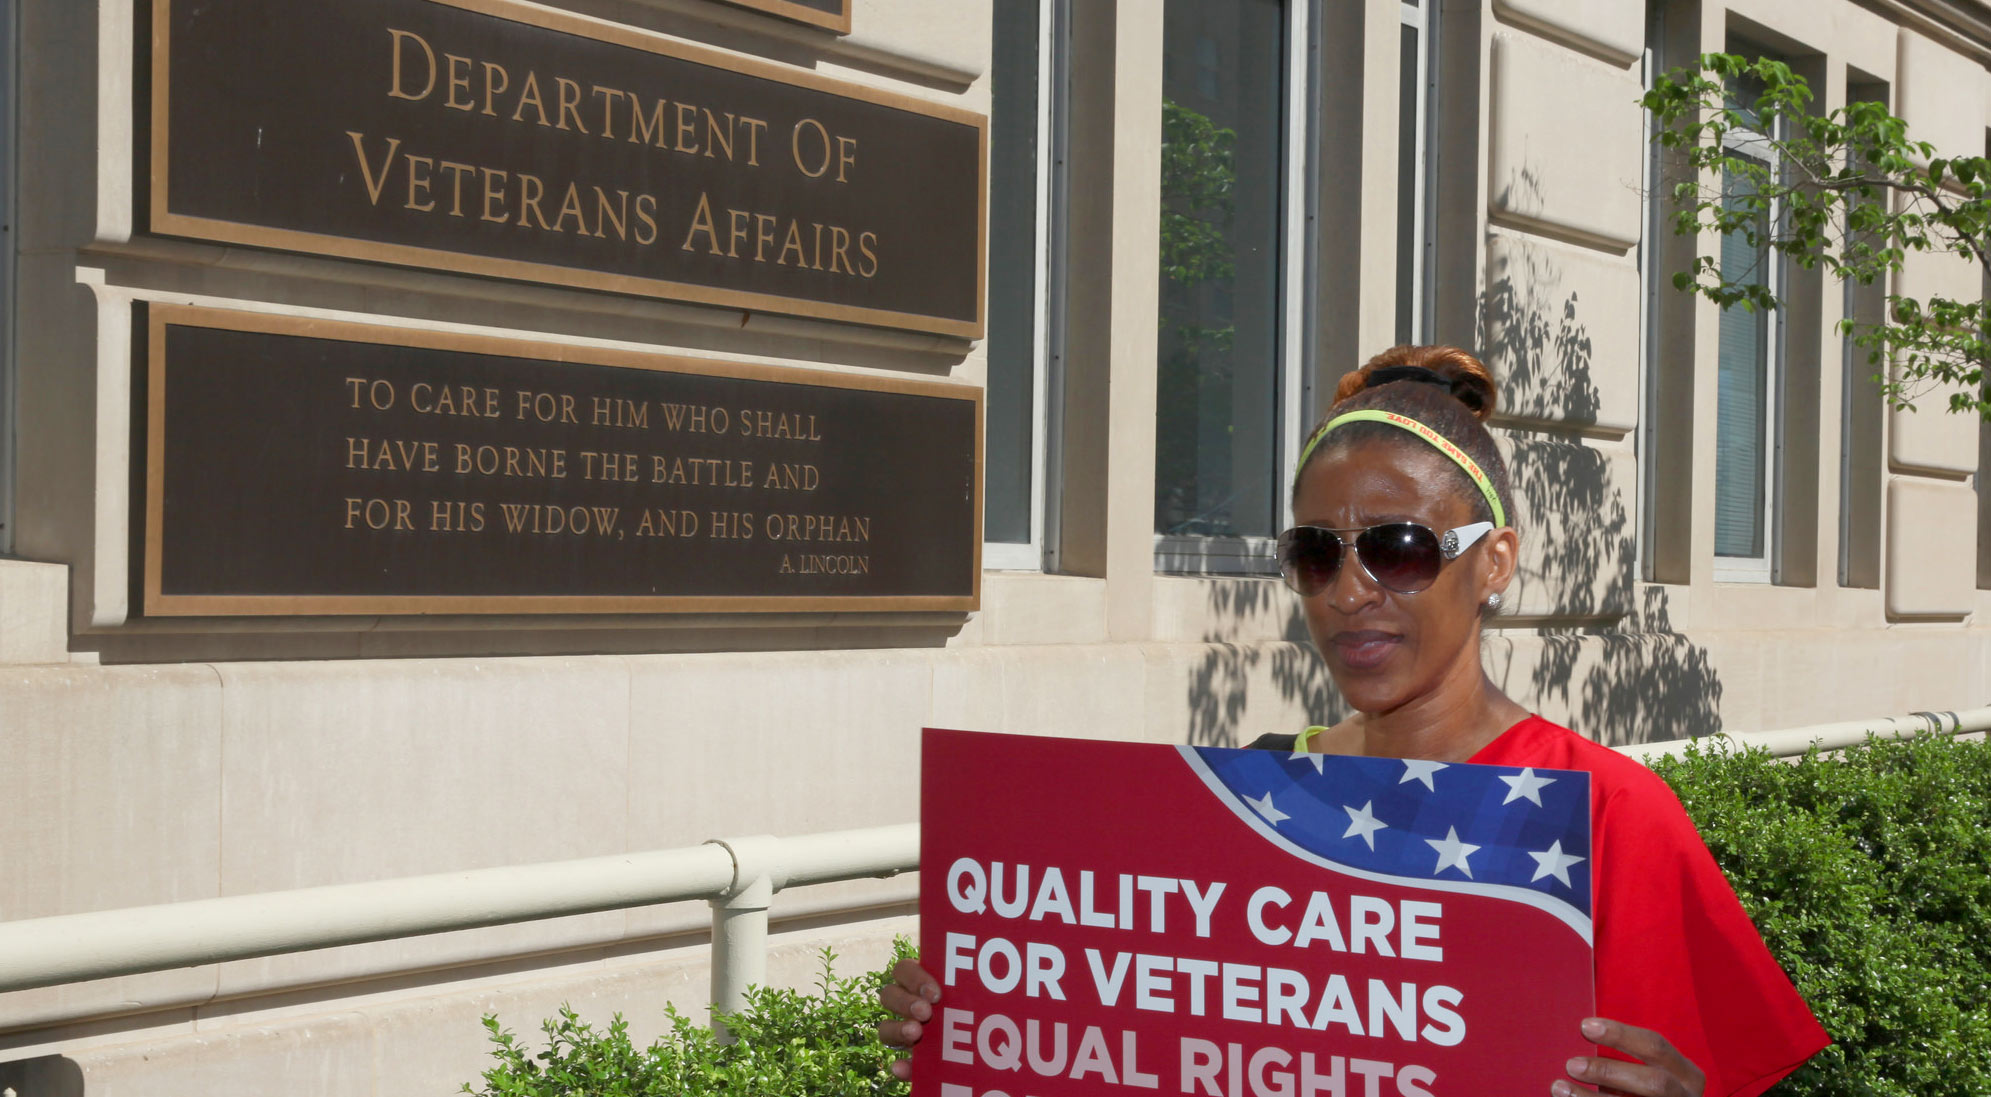 RN holding sign